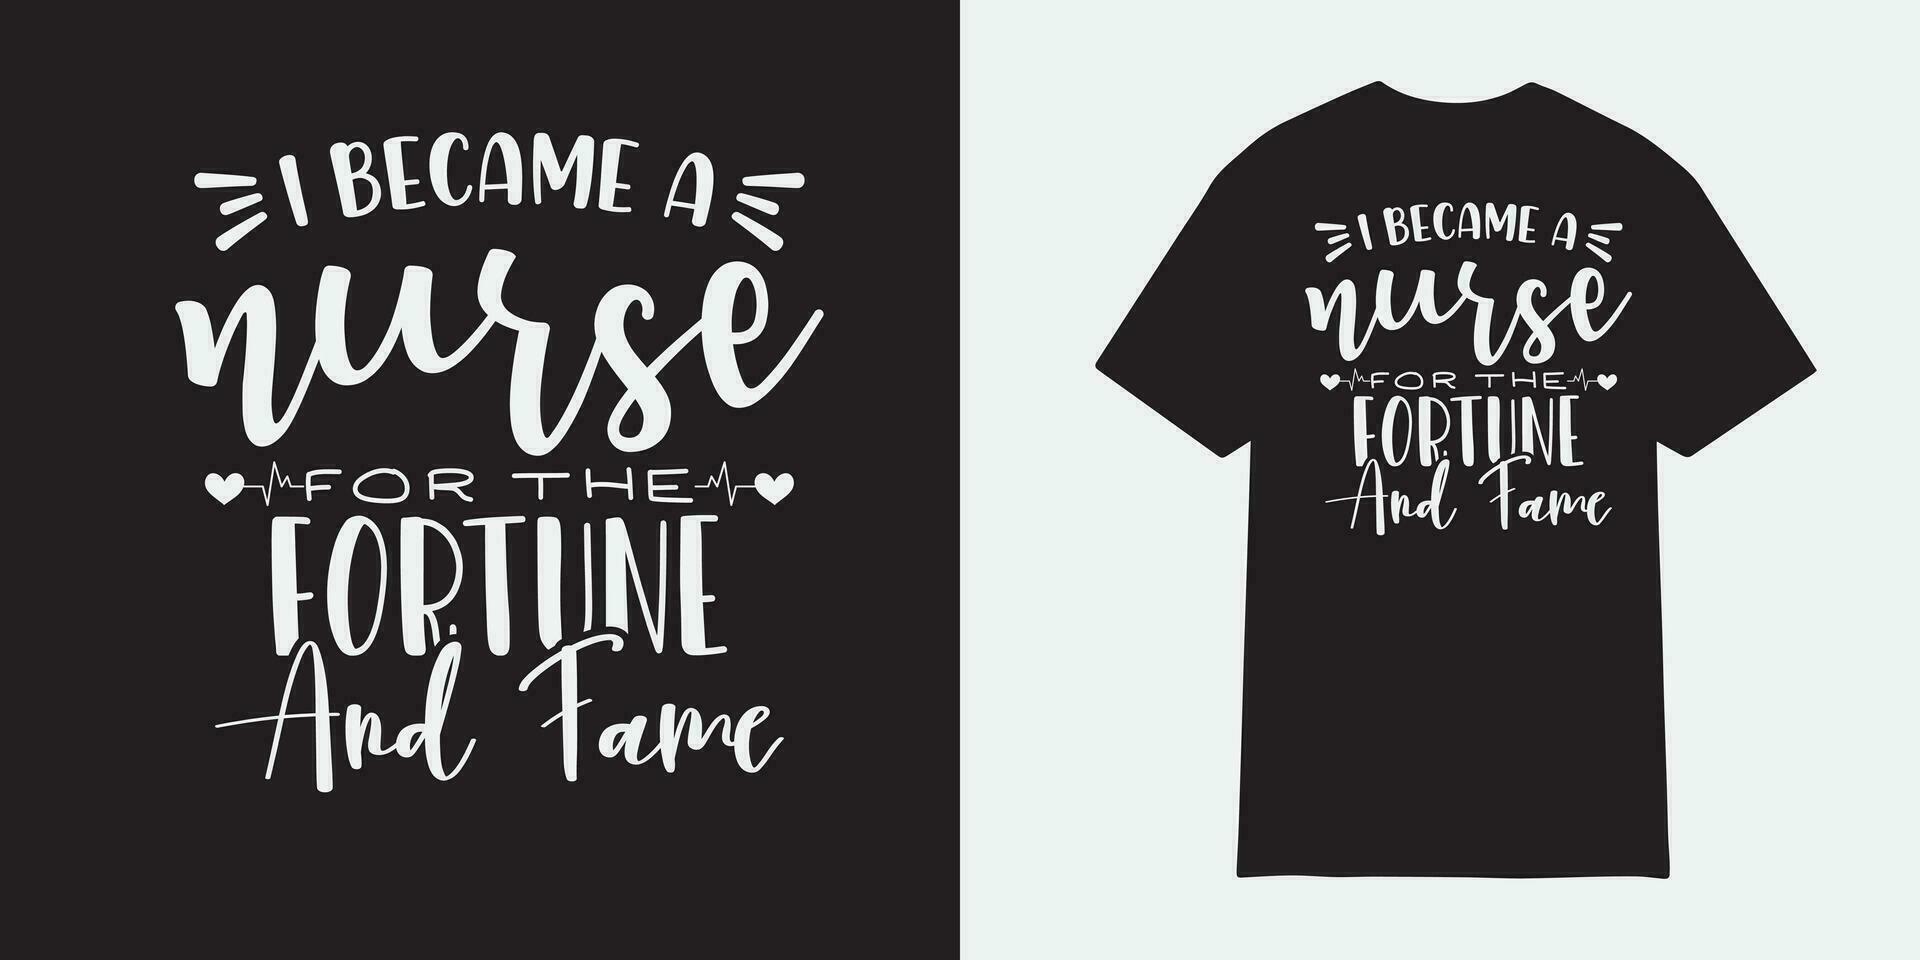 I became a nurse for the fotune and fame tshirt design, Nurse sublimation png, Free-ish, Black History png, Cut Files for Cricut, Silhouette, Typography nurse vector, nurse t shirt design vector